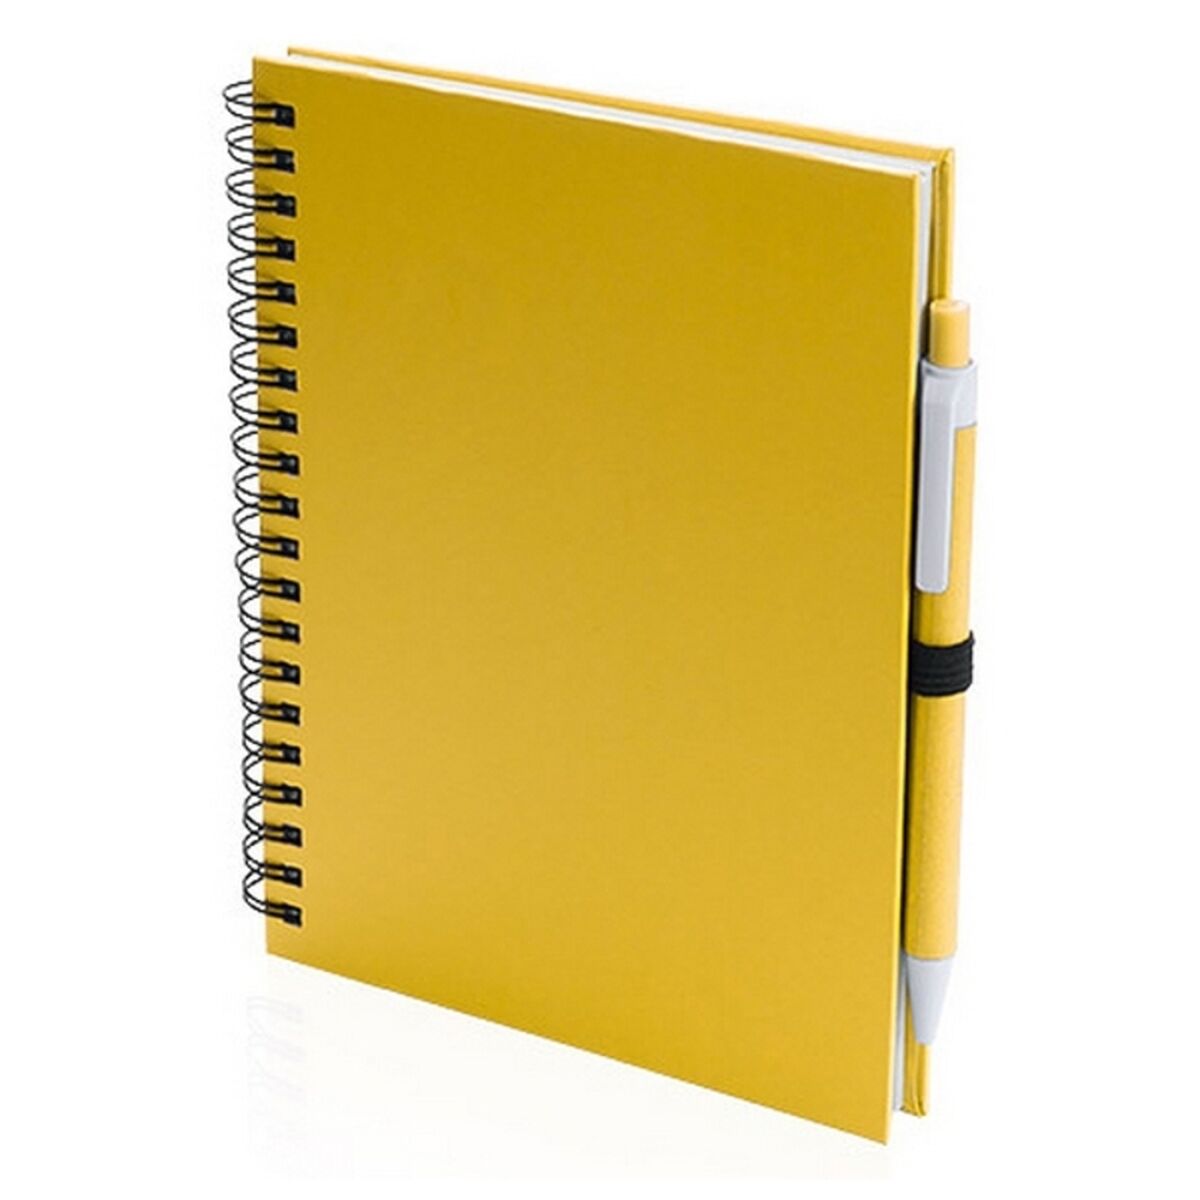 Spiral Notebook with Pen 144729